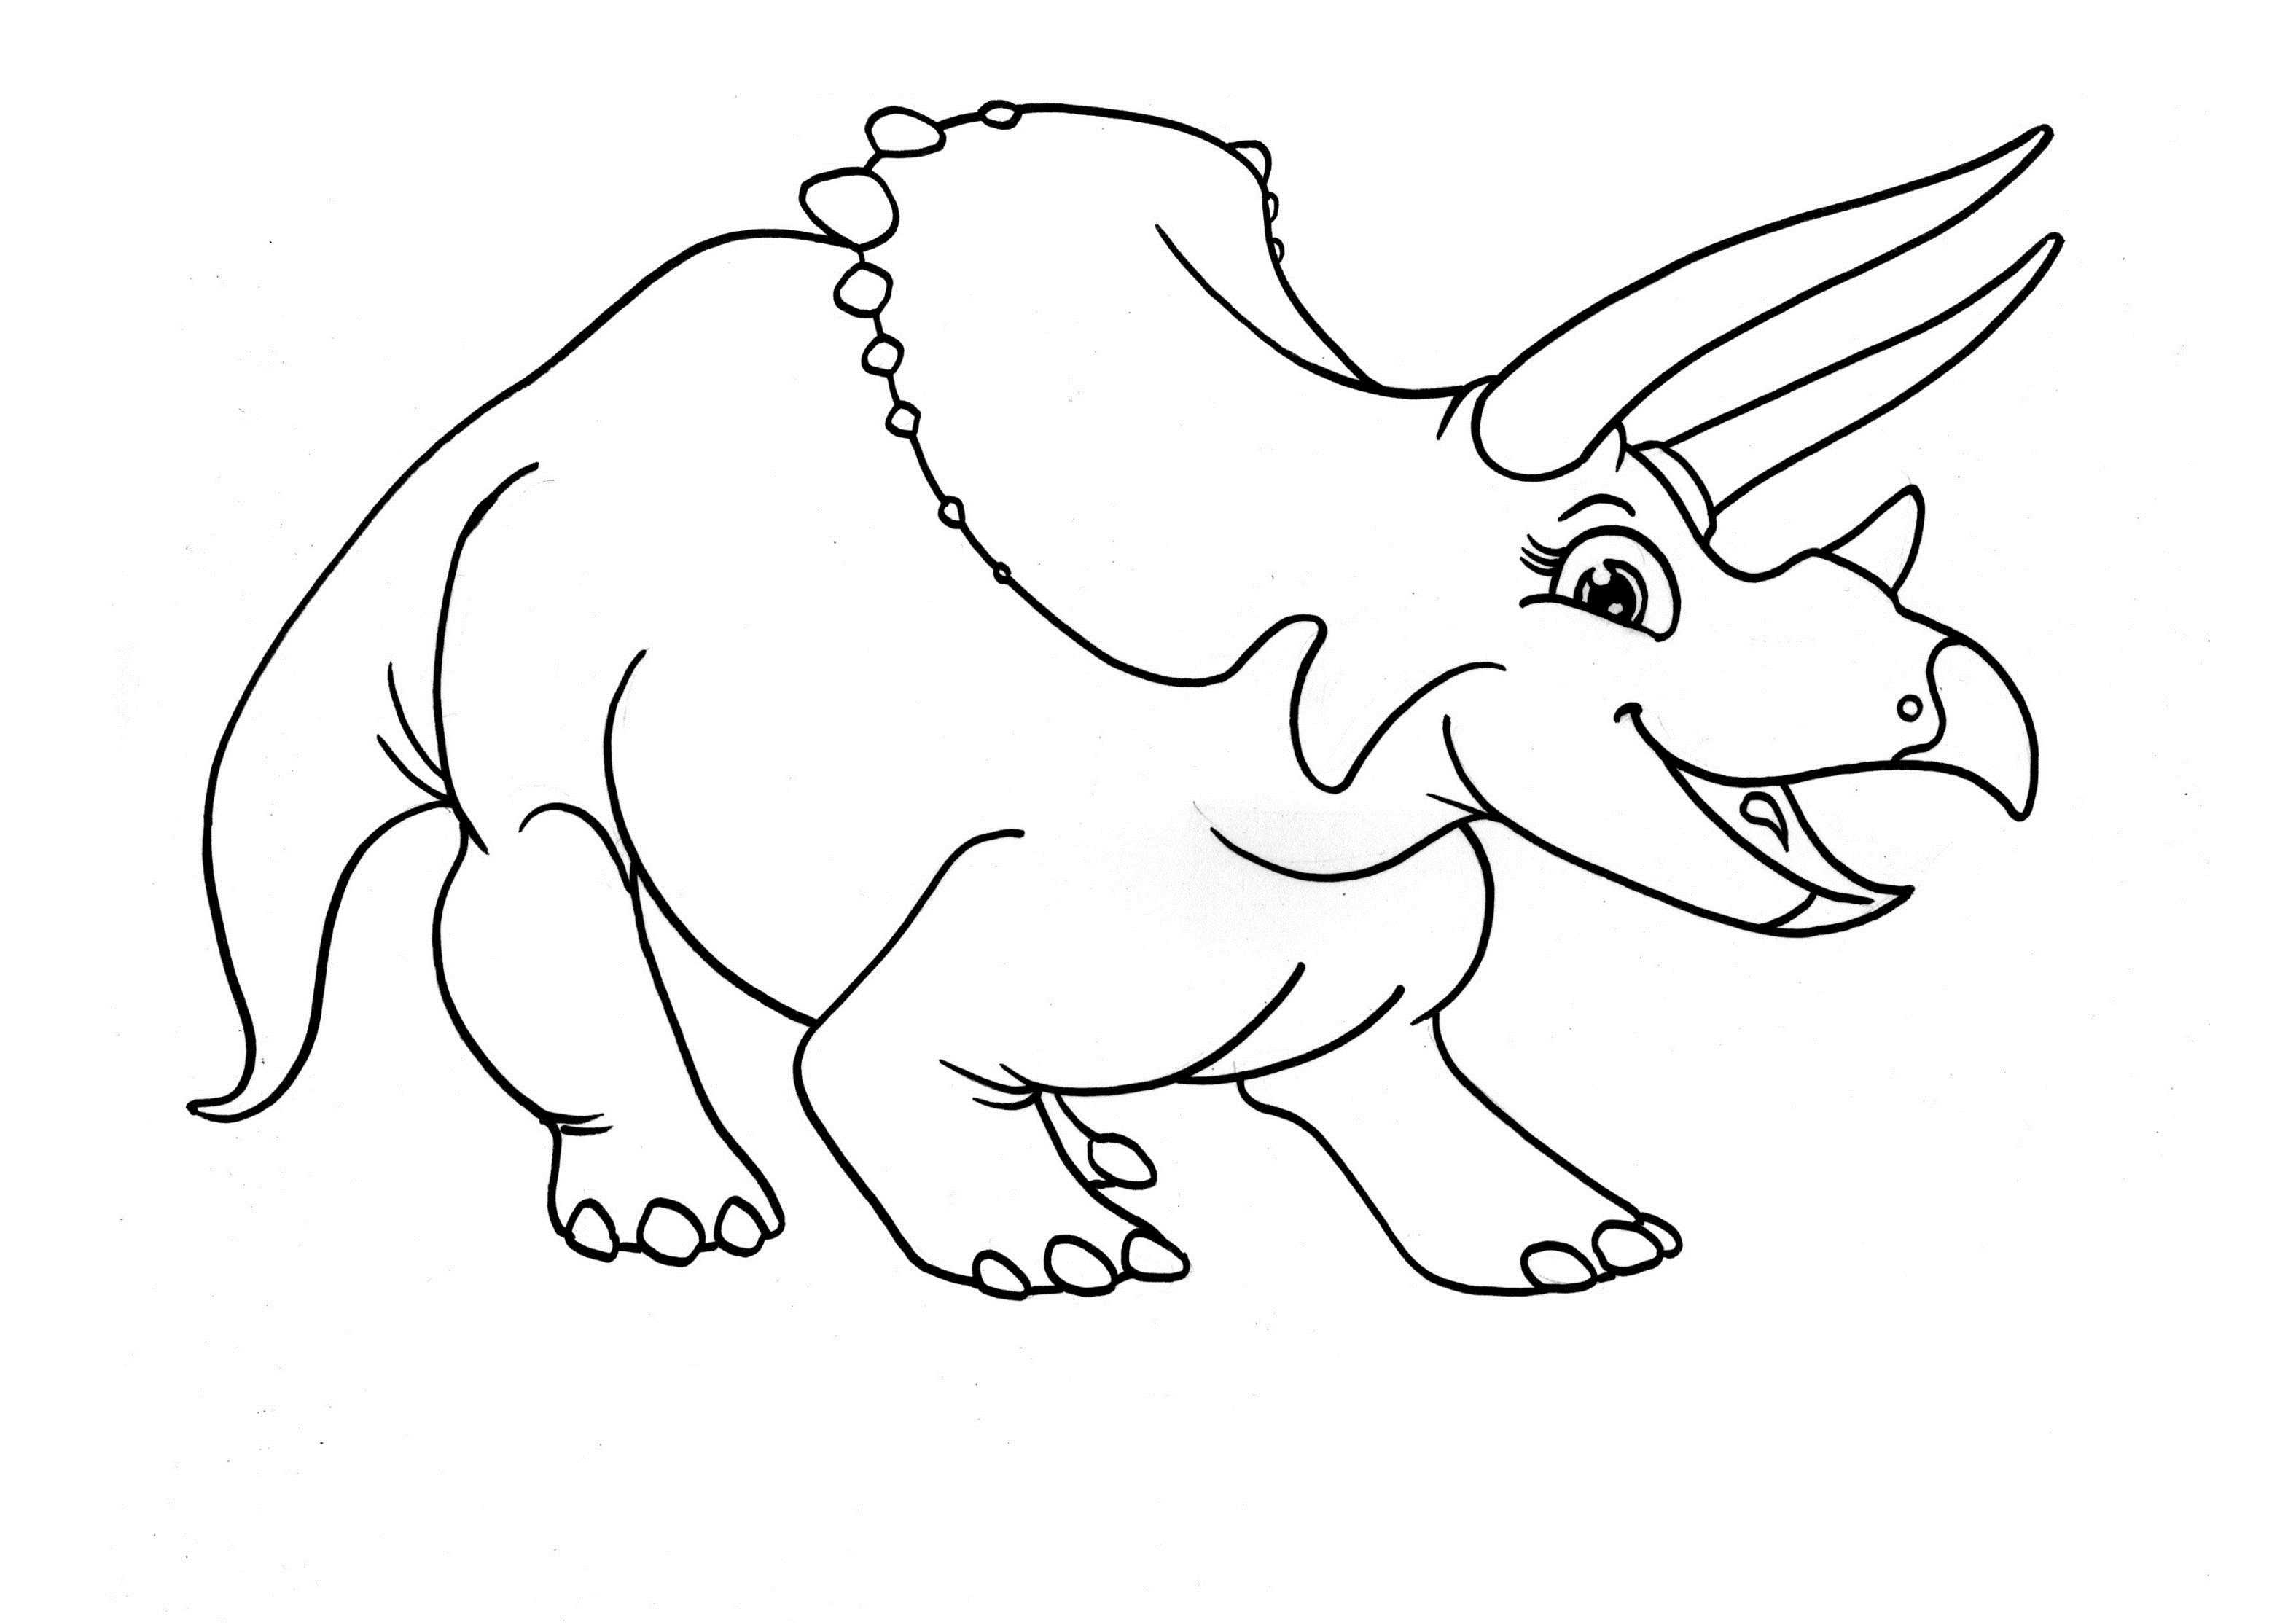 coloring-pages-dinosaur-free-printable-coloring-pages